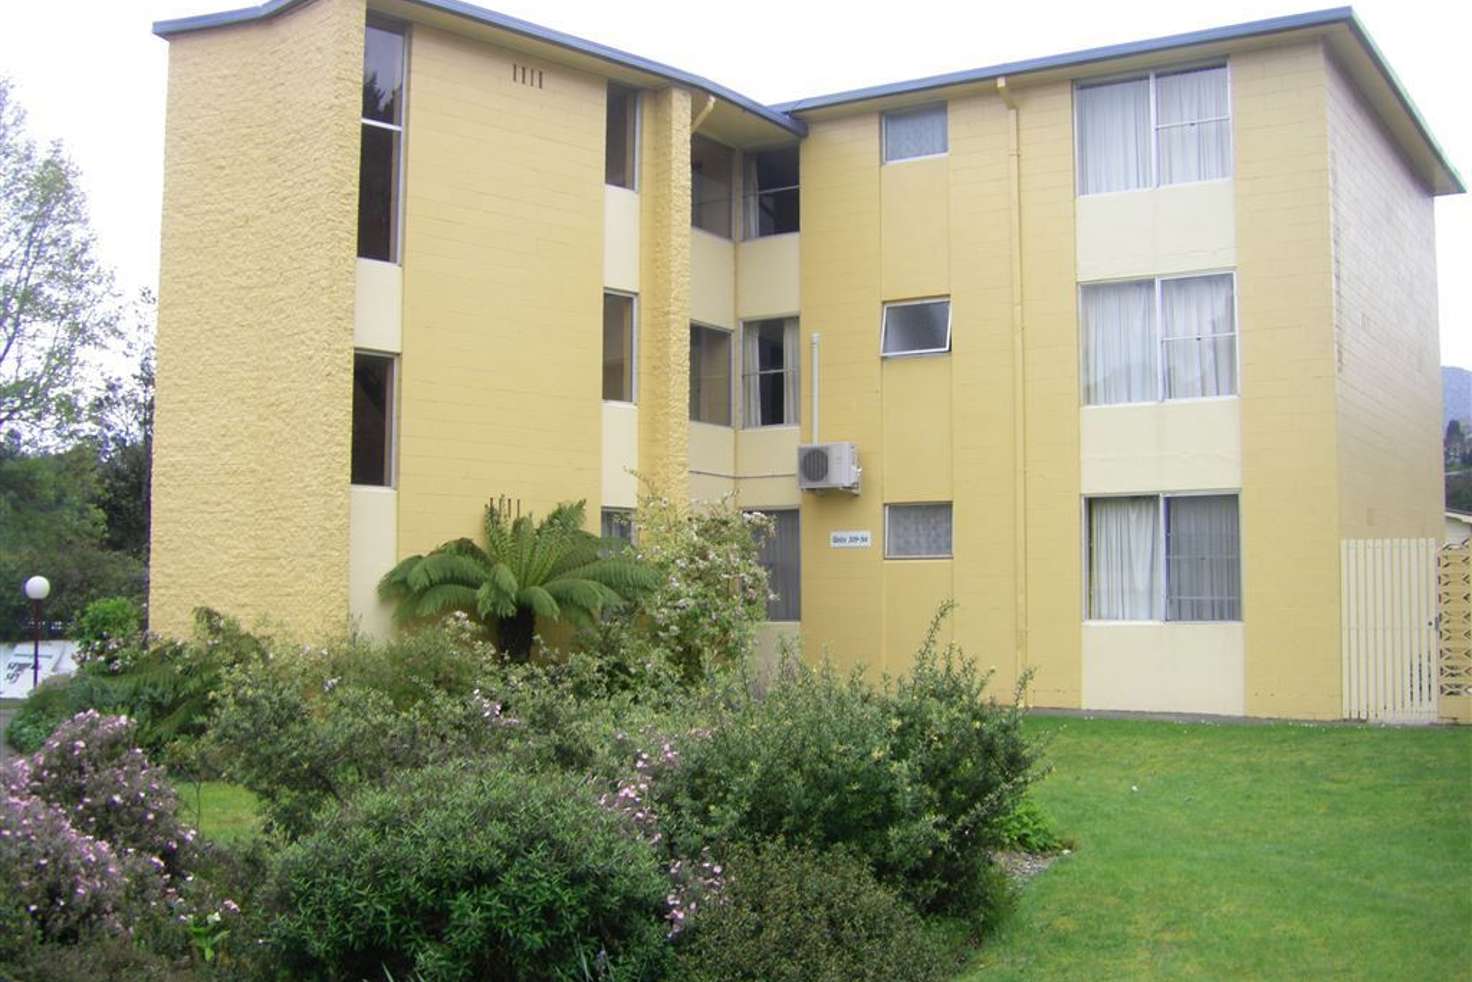 Main view of Homely unit listing, 310/1 Batchelor St, Queenstown TAS 7467